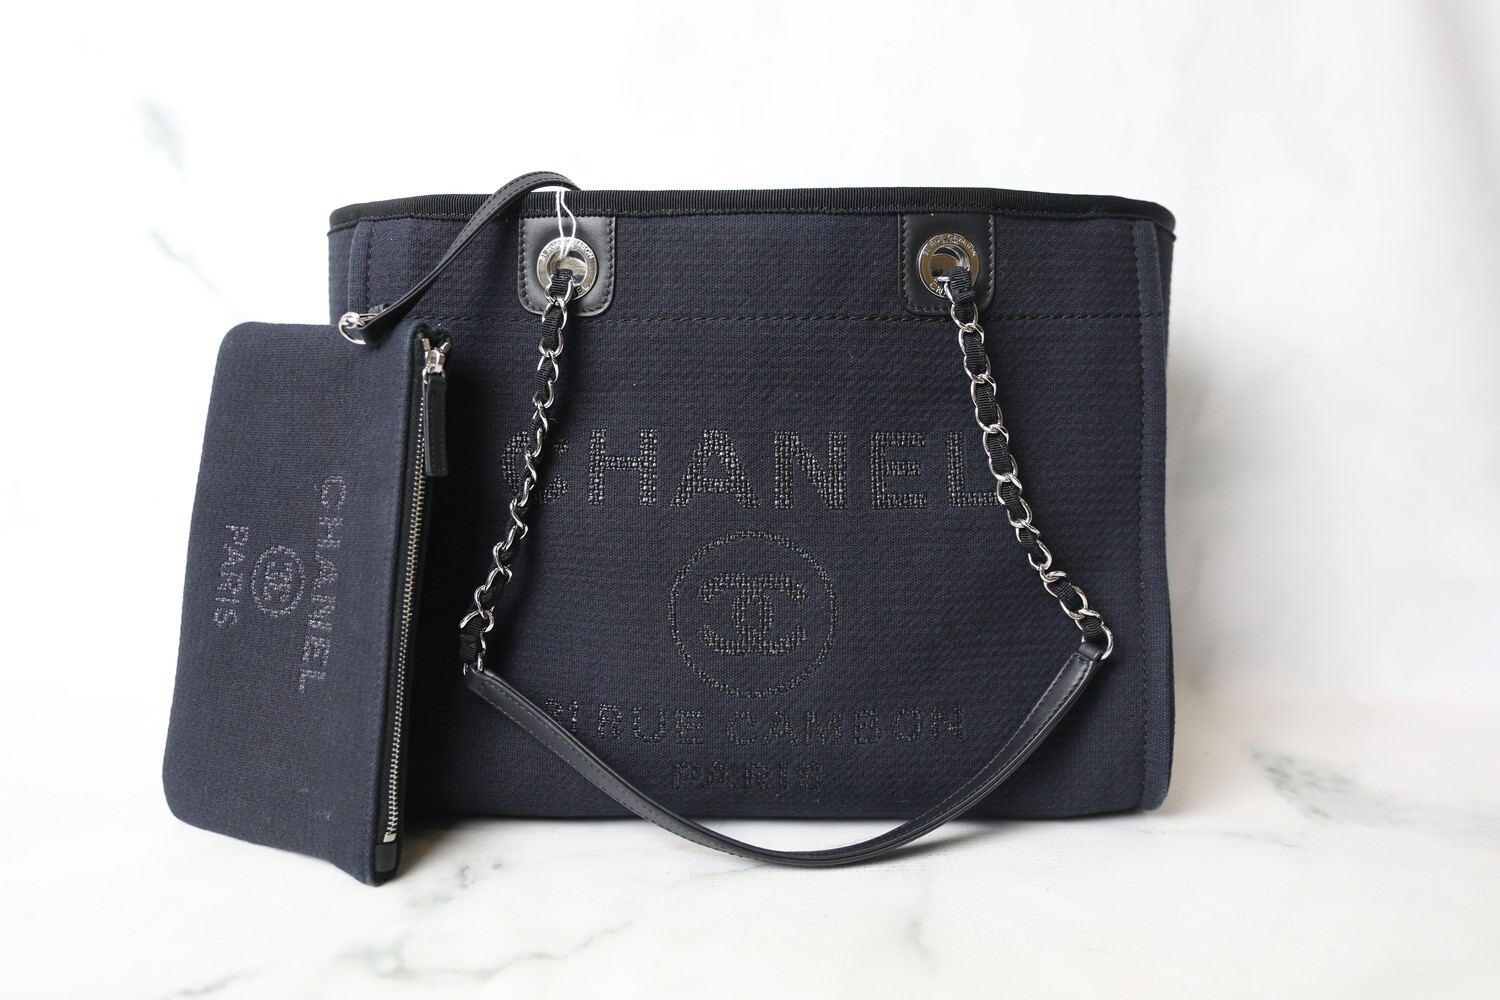 Embroidered Pu Leather CHANEL DEAUVILLE FABRIC TOTE DARK FABRIC